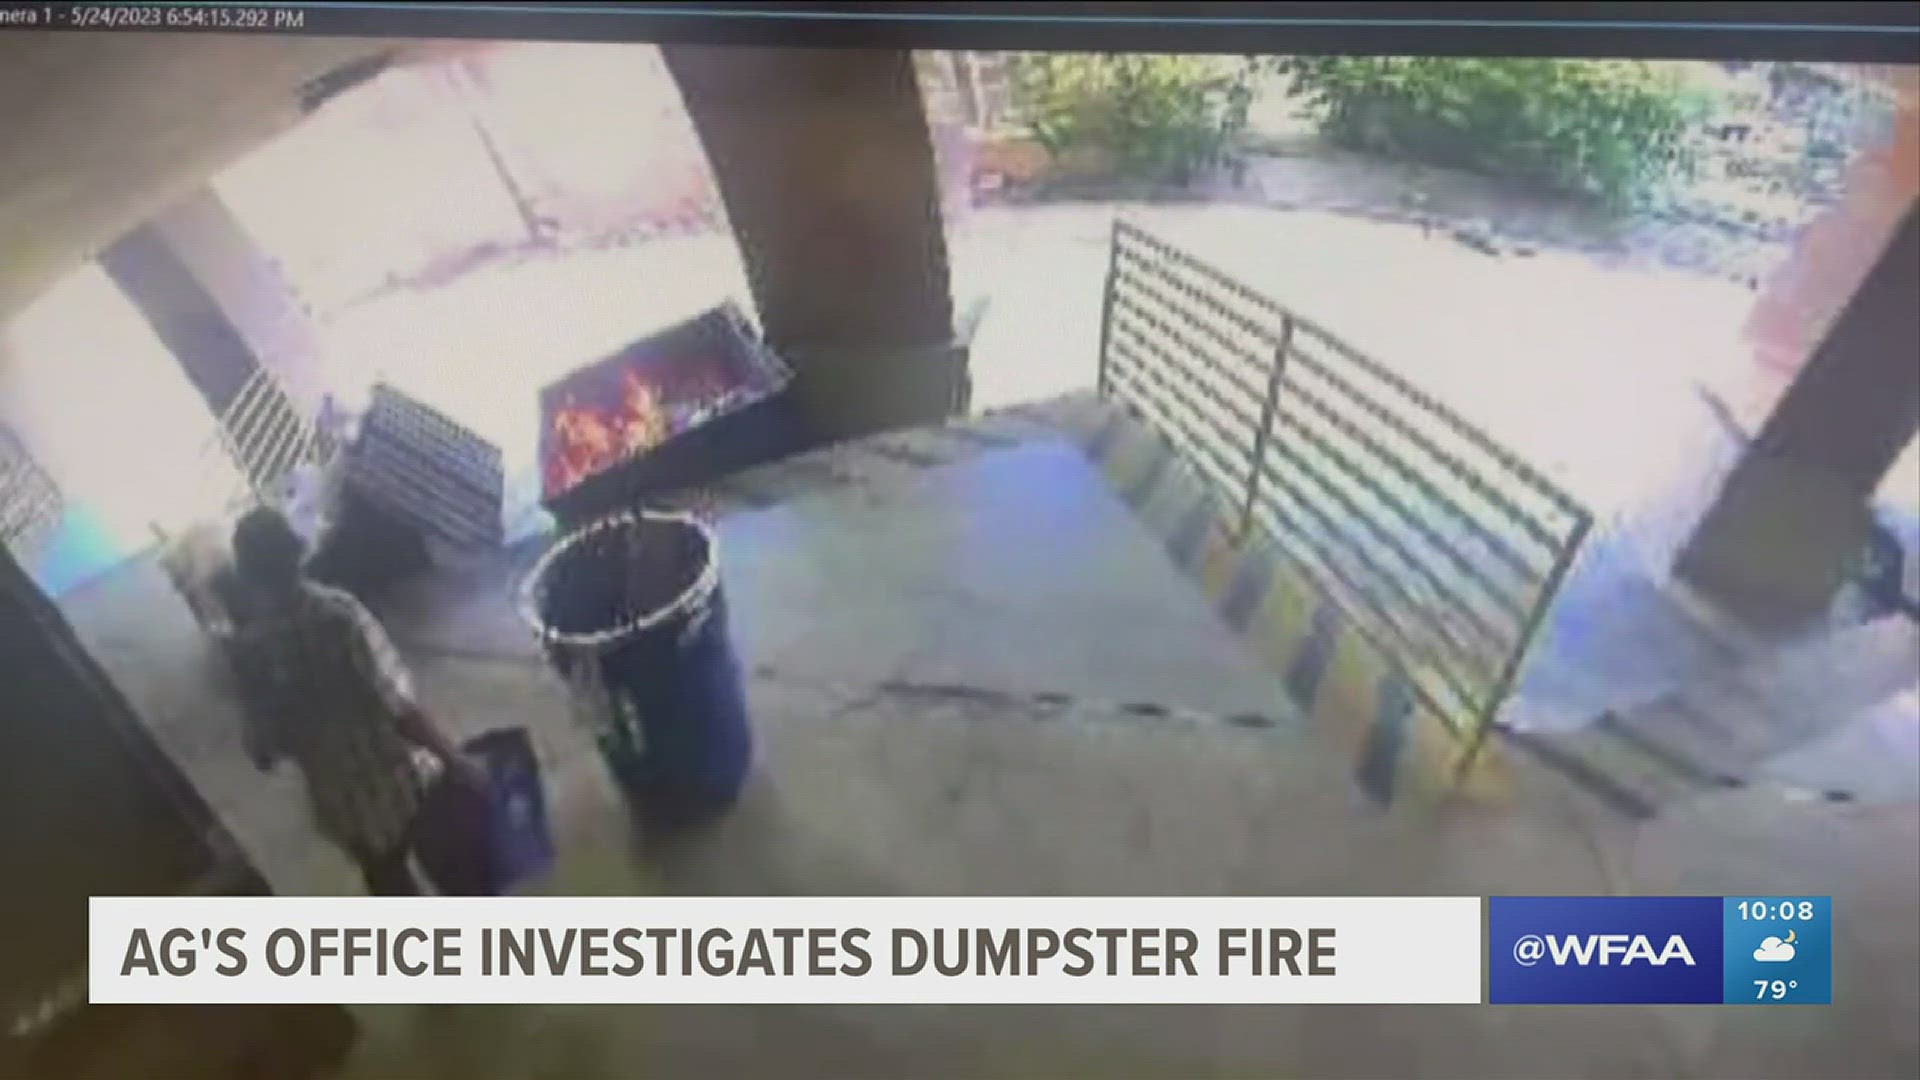 The Texas AG's office says it's working to identify a person of interest in an arson.